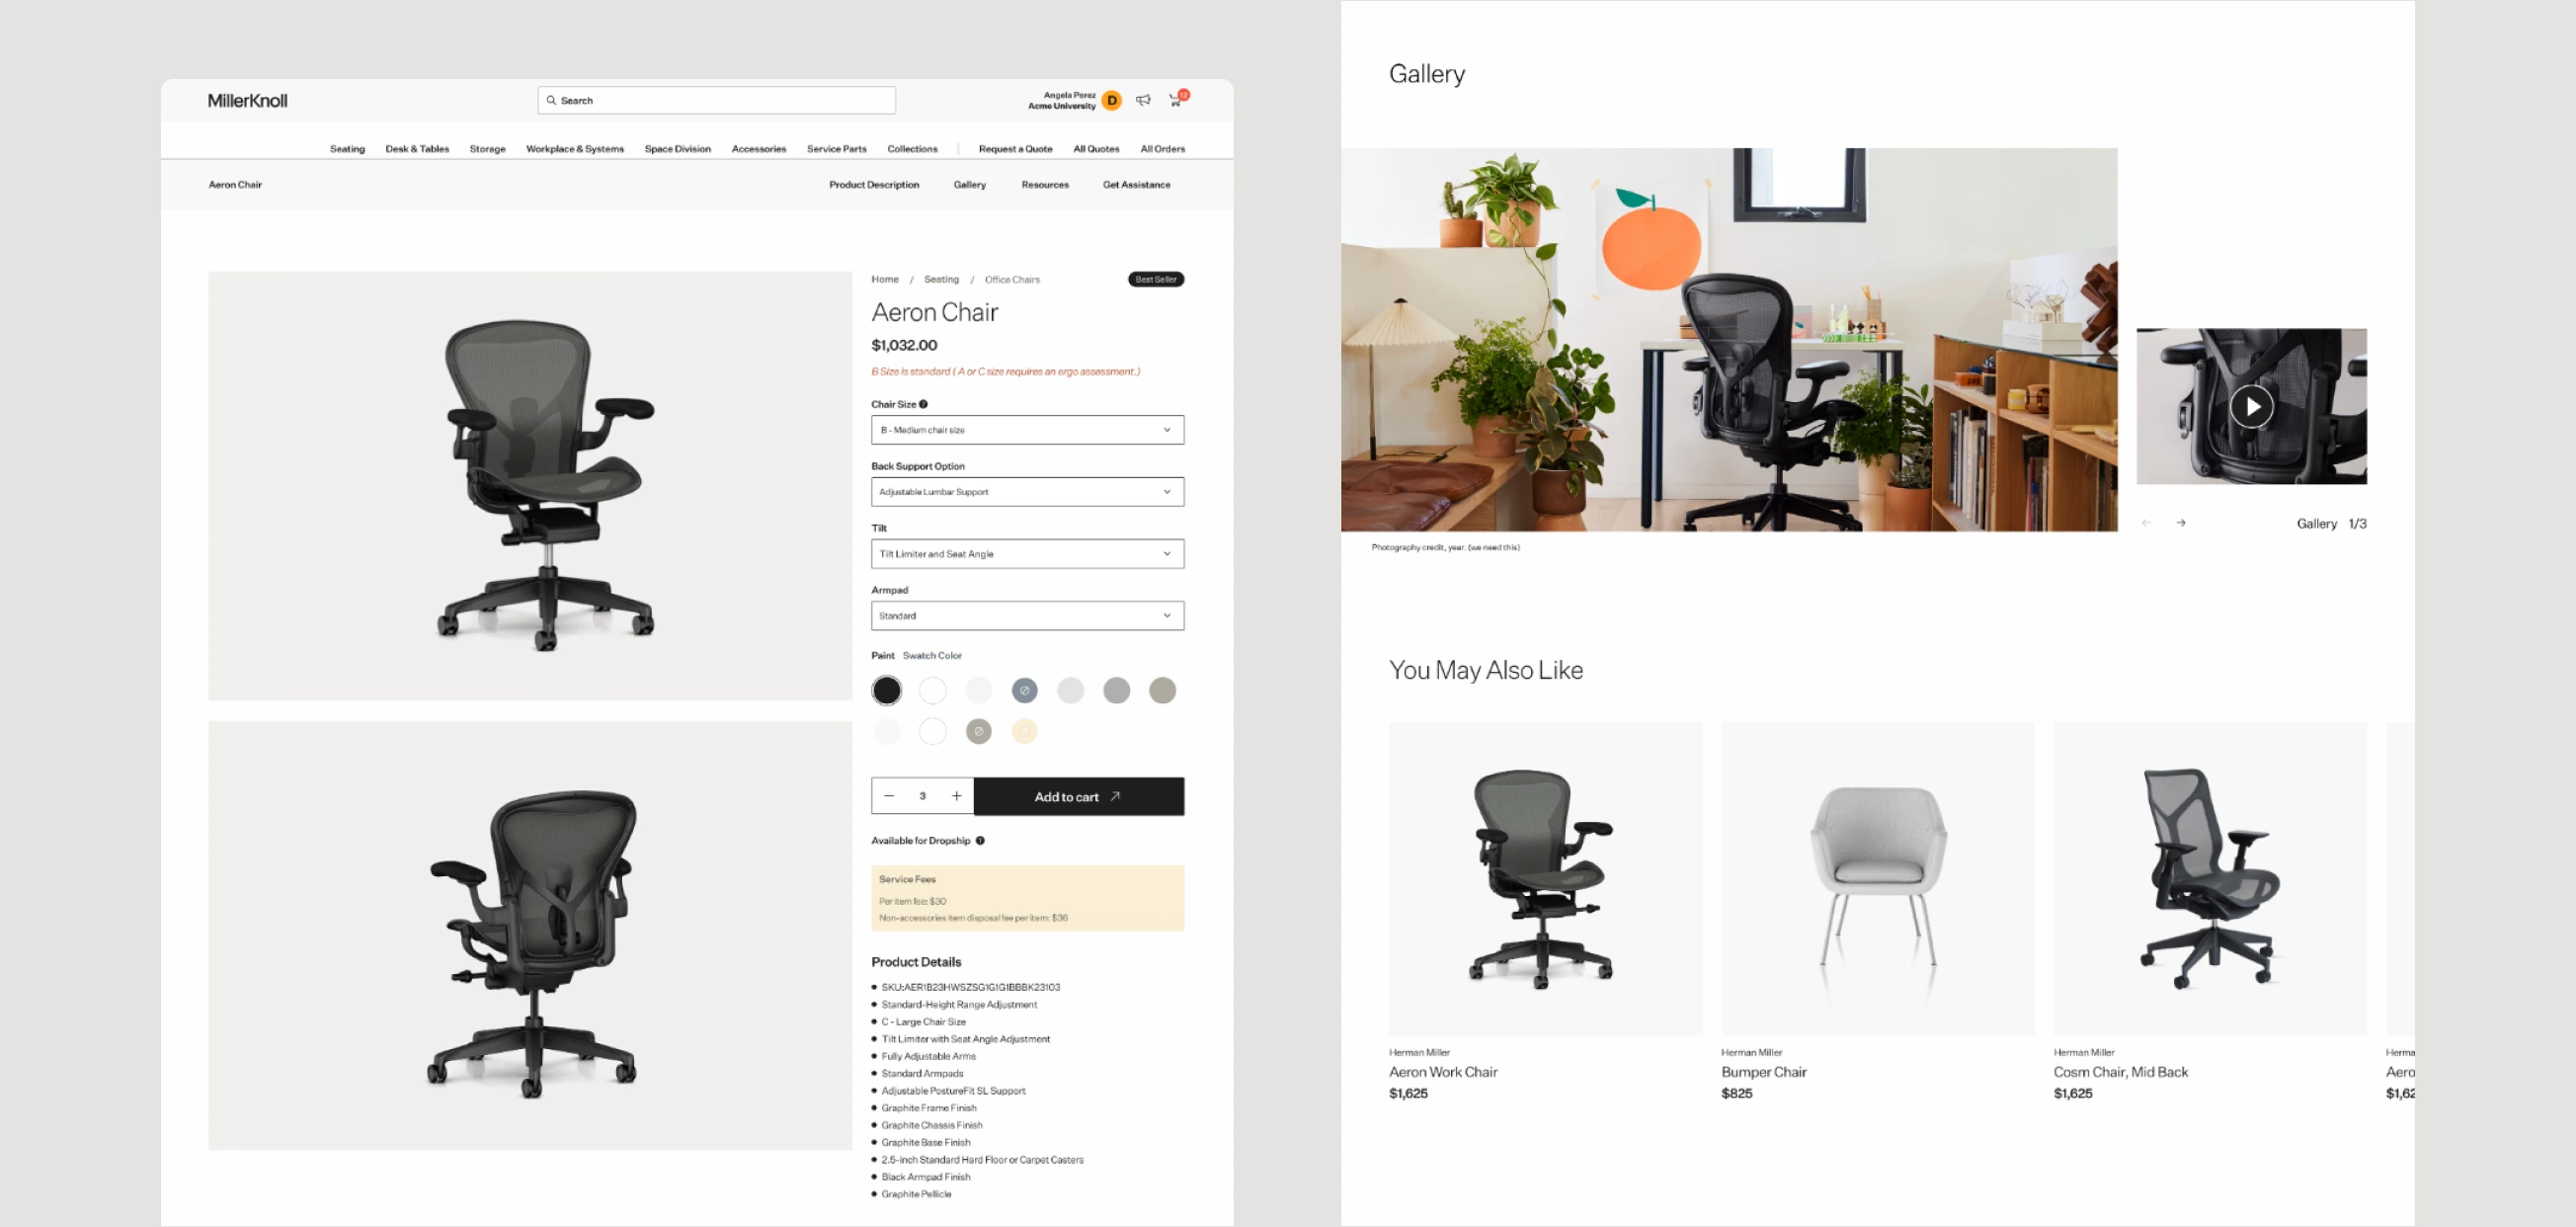 Millerknoll e-commerce store UI and product images.